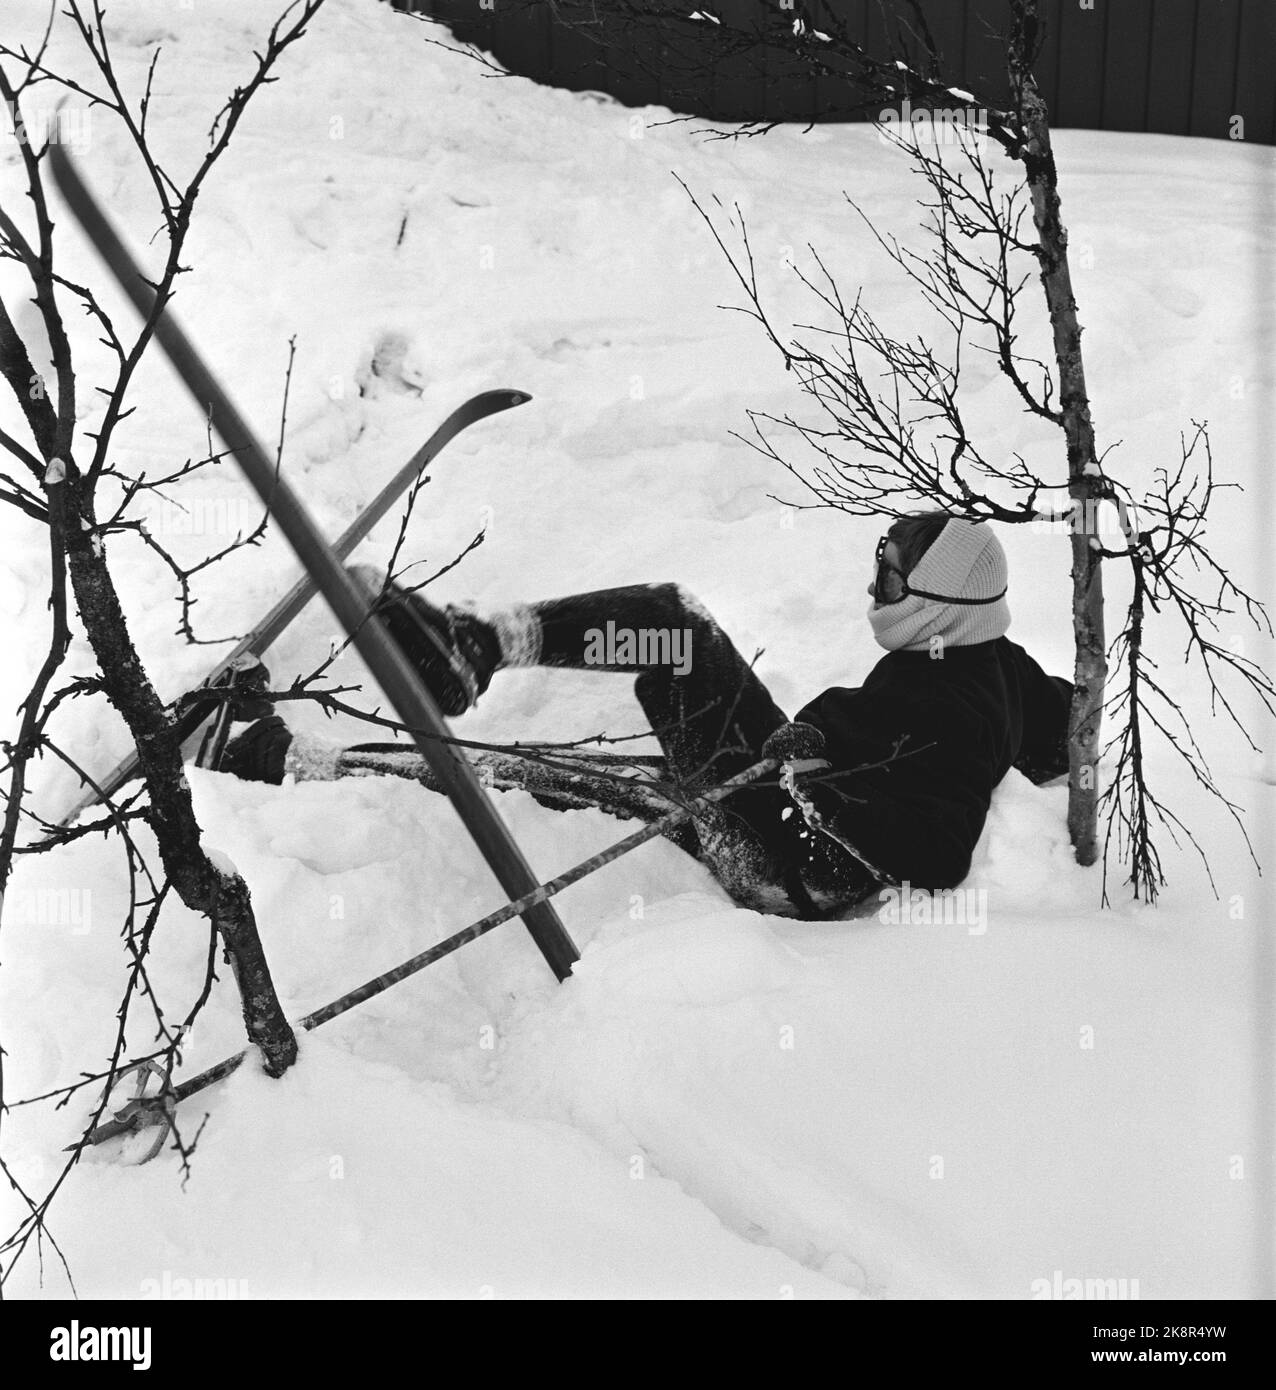 Gausdal 1955 - Queen Ingrid of Denmark on a private winter holiday in Norway with her three daughters, inheritance princess Margrethe, Princess Benedikte and Princess Anne -Marie. Queen Ingrid has not had skis on his legs in 20 years. In the picture lies the heir Margrethe and caves in the snow, after skiing. Photo: Sverre A. Børretzen / Current / NTB Stock Photo